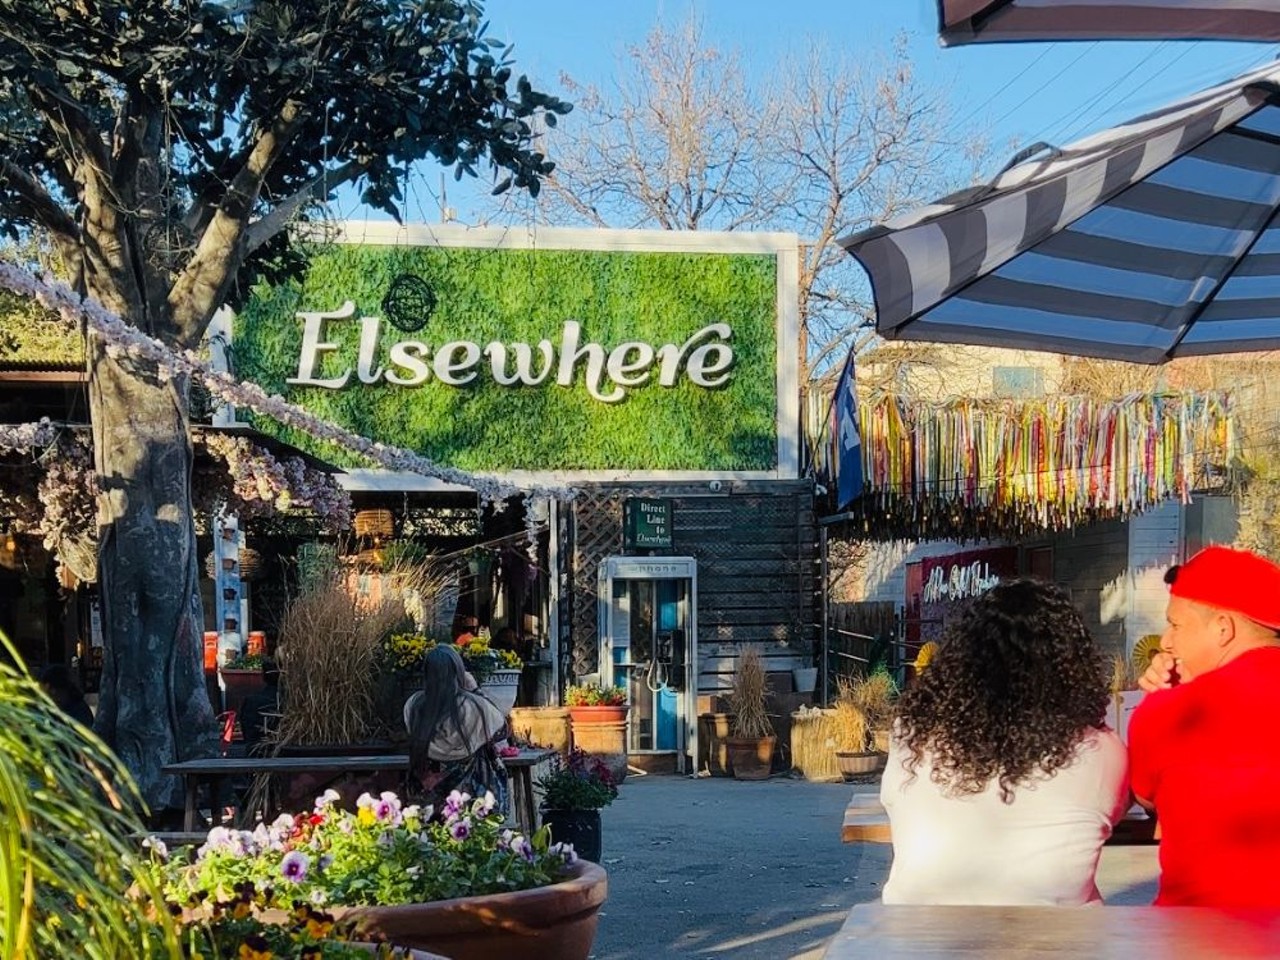 Elsewhere Garden Bar & Kitchen 
103 E. Jones Ave., (210) 201-5595, elsewheretexas.com
Elsewhere’s notoriety starts with its impressive outdoor space, replete with larger-than-life art installations including two giant faux-topiary giraffes standing guard over a sign that declares BE KIND. The spot also amps up the ambiance with elevated entertainment like aerial acrobats and fire dancers.